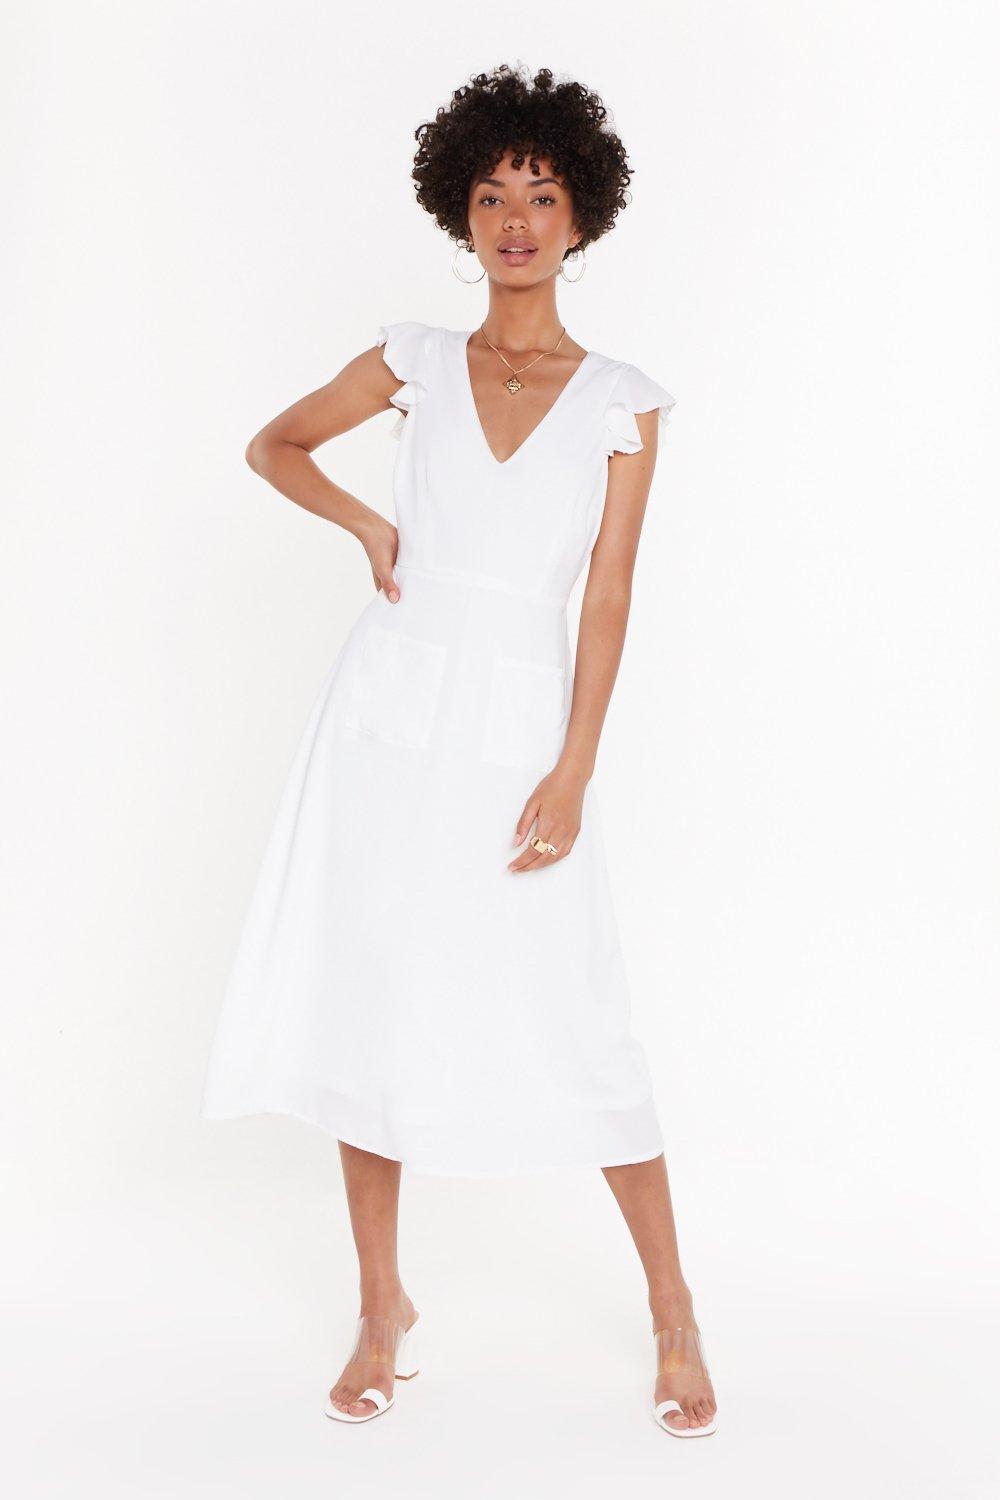 white linen dress with pockets